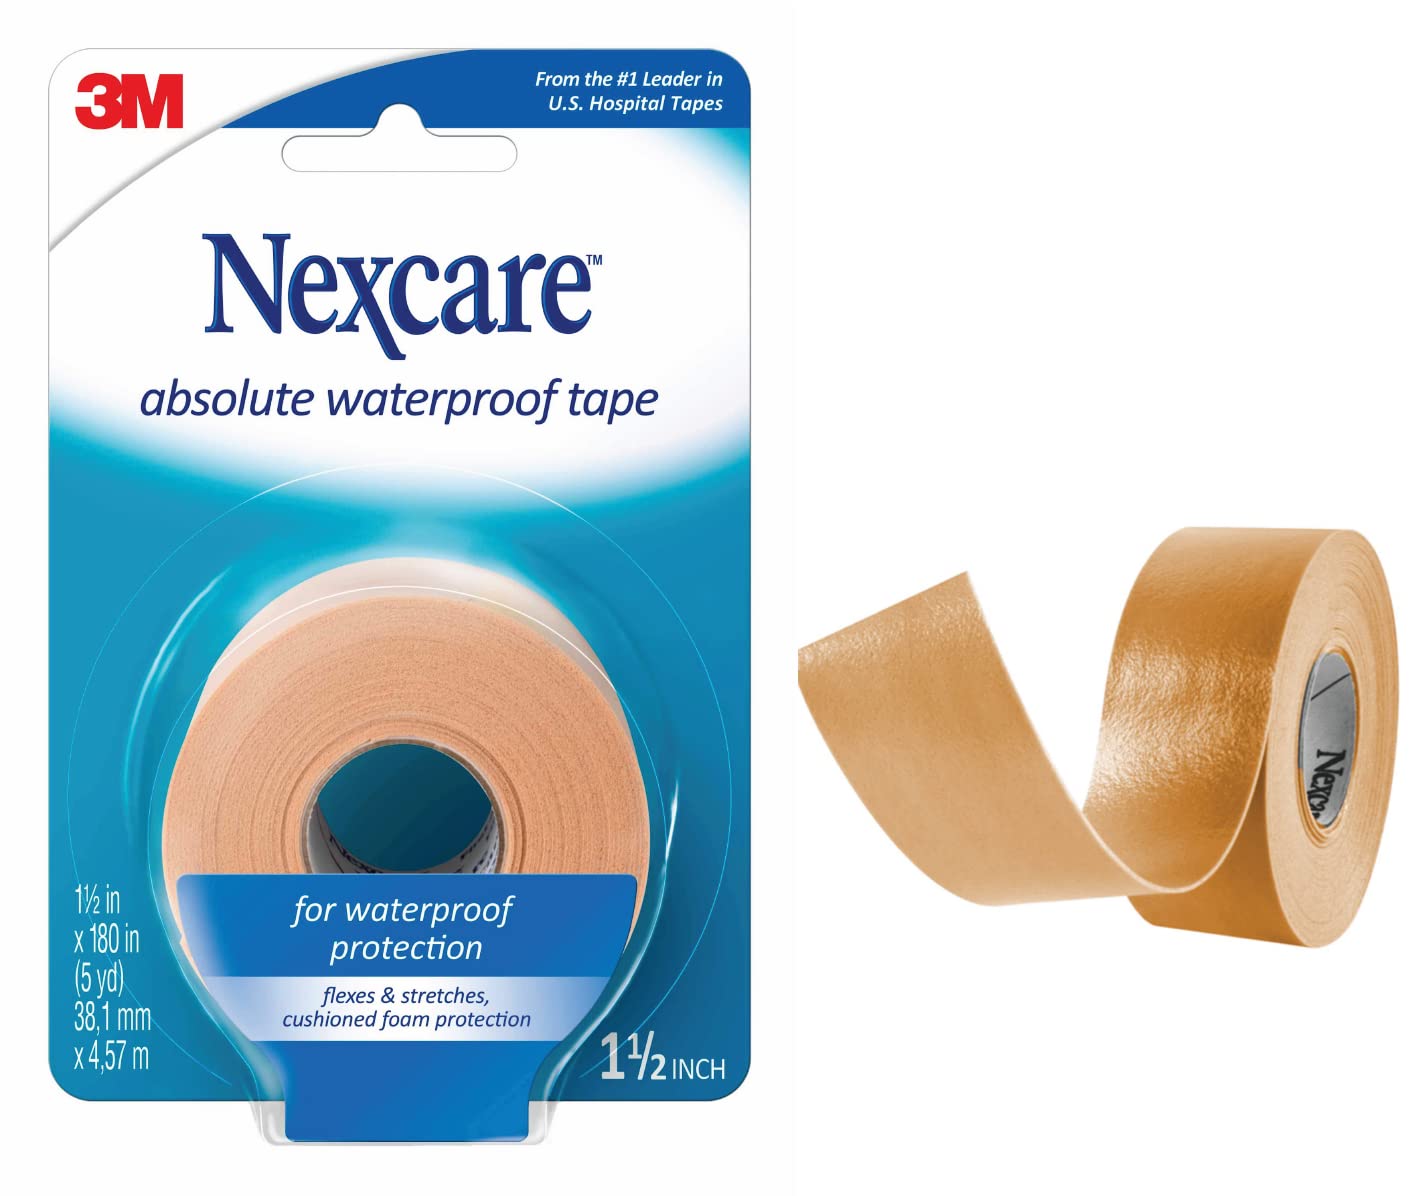 Nexcare Absolute Waterproof First Aid Tape, Strong Adhesive Stays On During Water Activities And Exercising, 1.5 In x 5 Yds